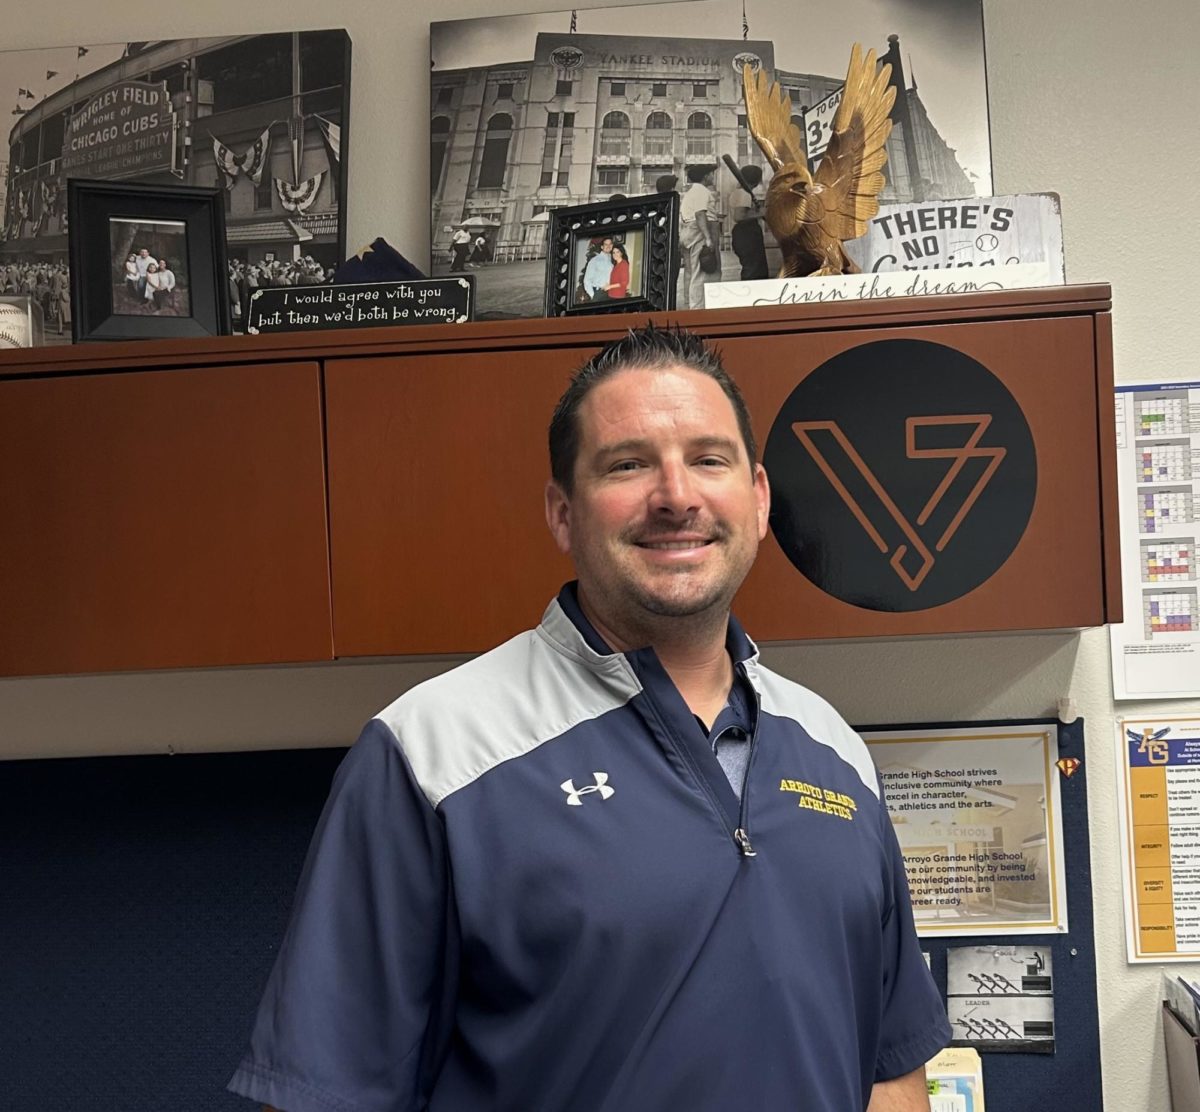 Brad Grumbles keeps photos of his family and sentimental items in his office that act as both memorabilia and interesting conversation topics.
